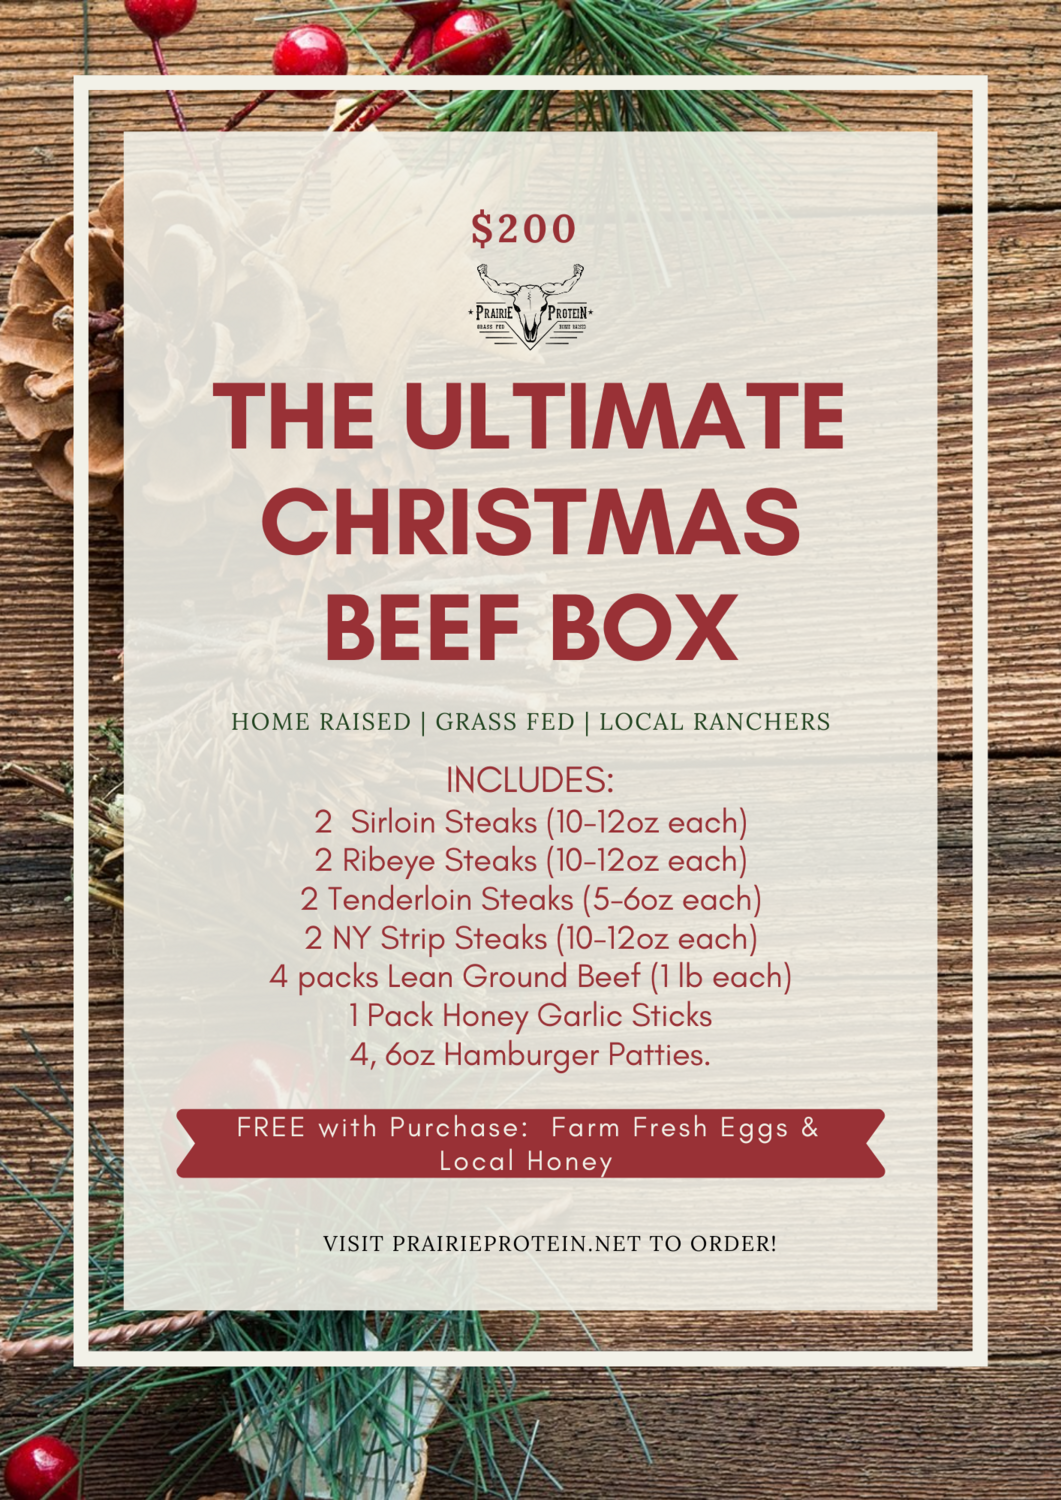 The Ultimate Christmas Beef Box ( With Free Farm Fresh Eggs & Honey)